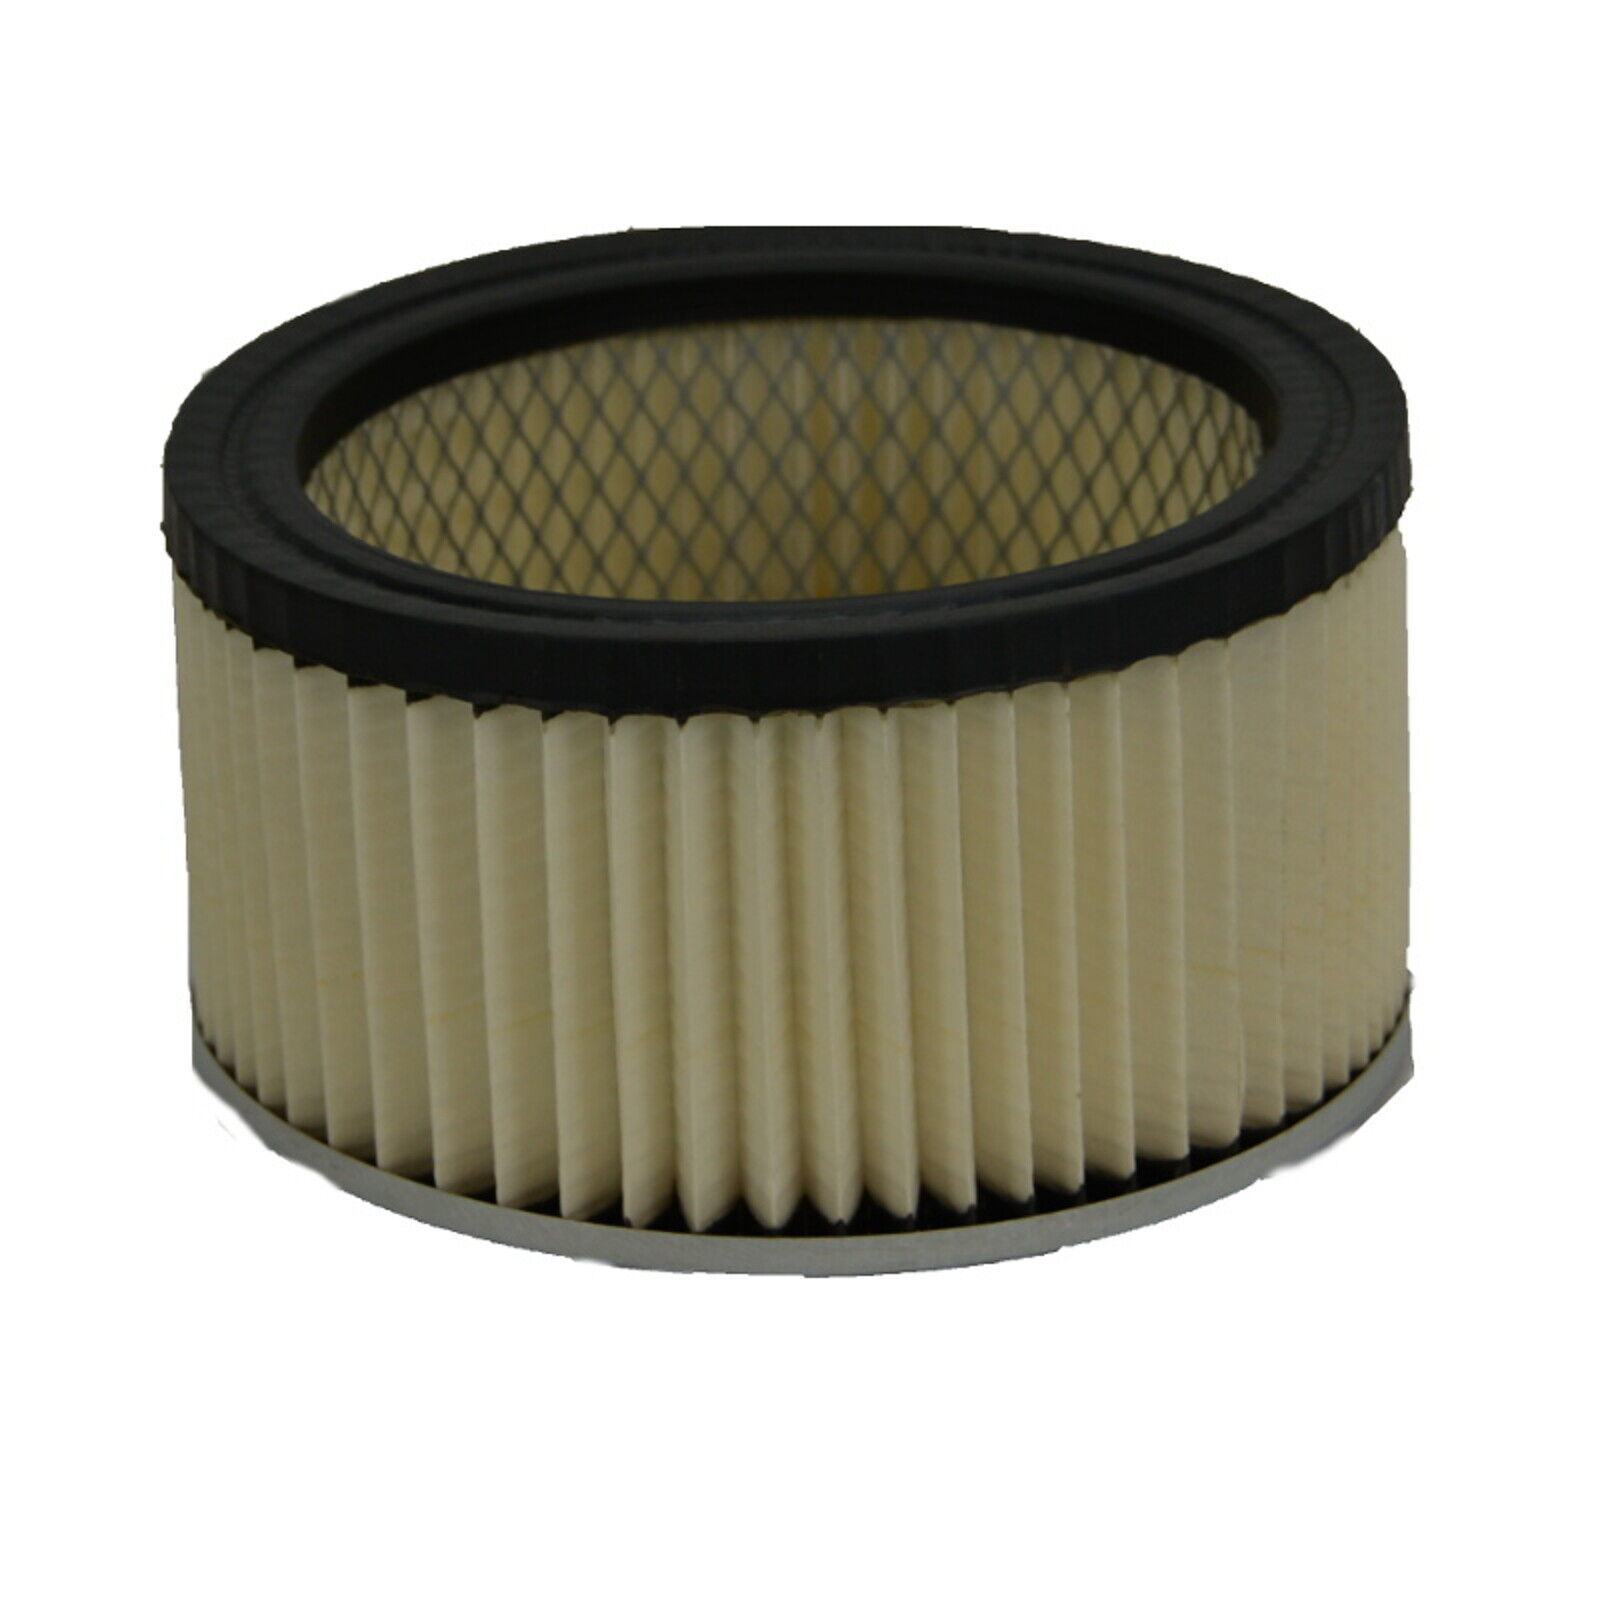 Primary image for Generic Wet Dry Vac Cartridge Filter Designed For Various Wet Dry Vacs AS3VAC-O